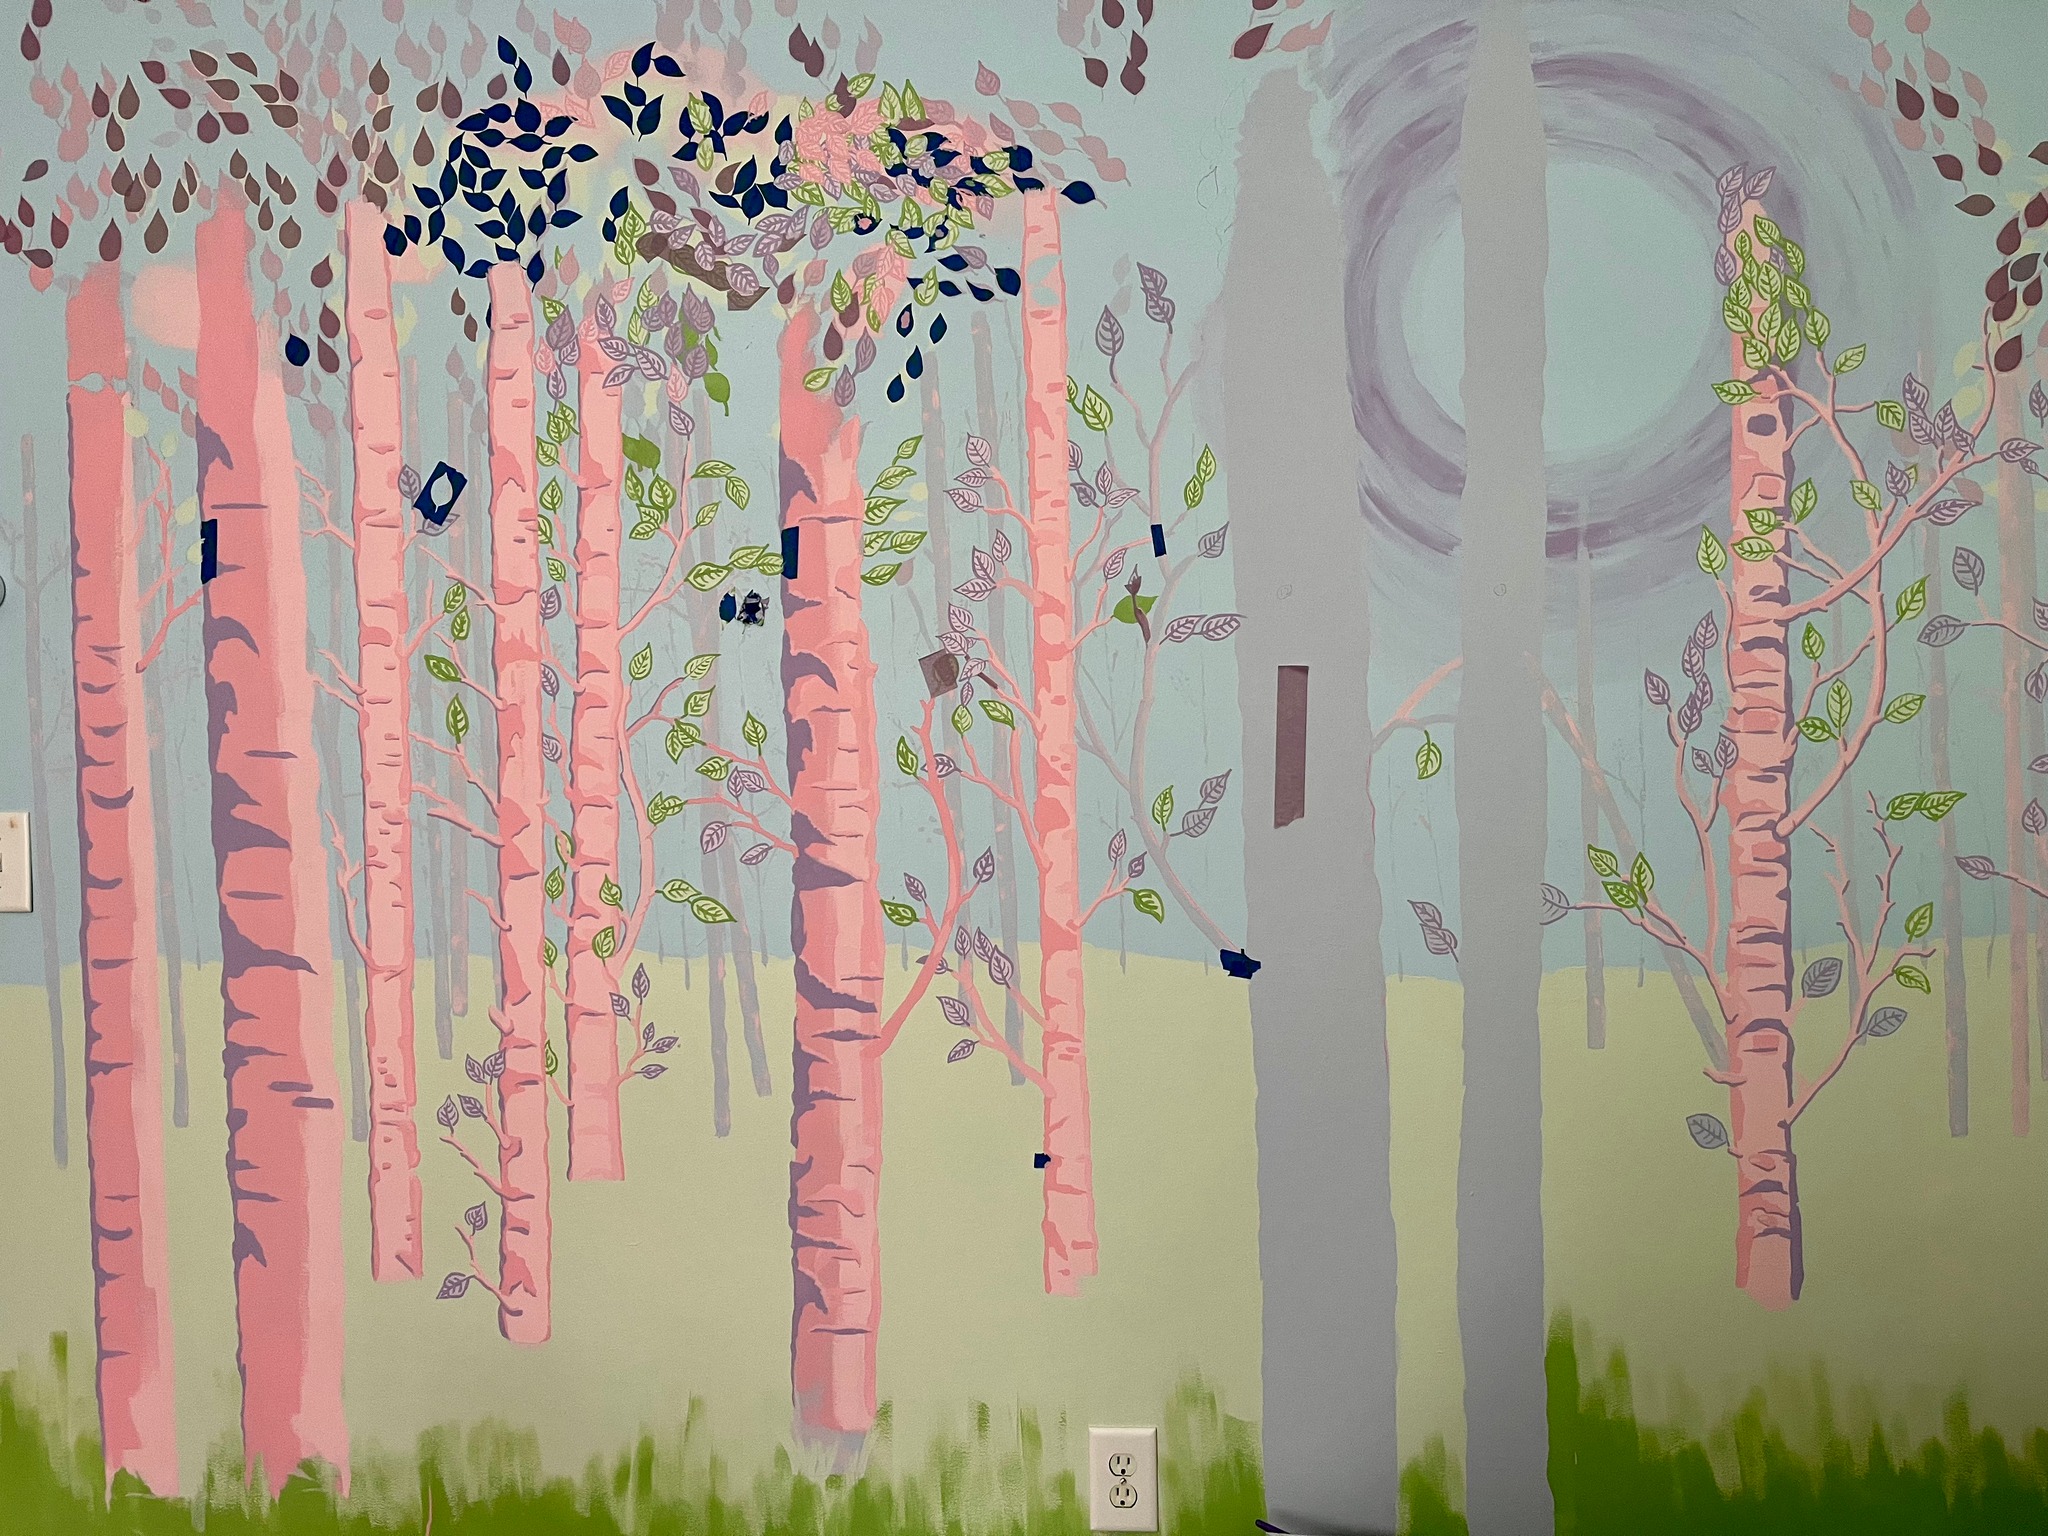 Tree trunks with scanty leaves. An incomplete painting of a fantasy forest.